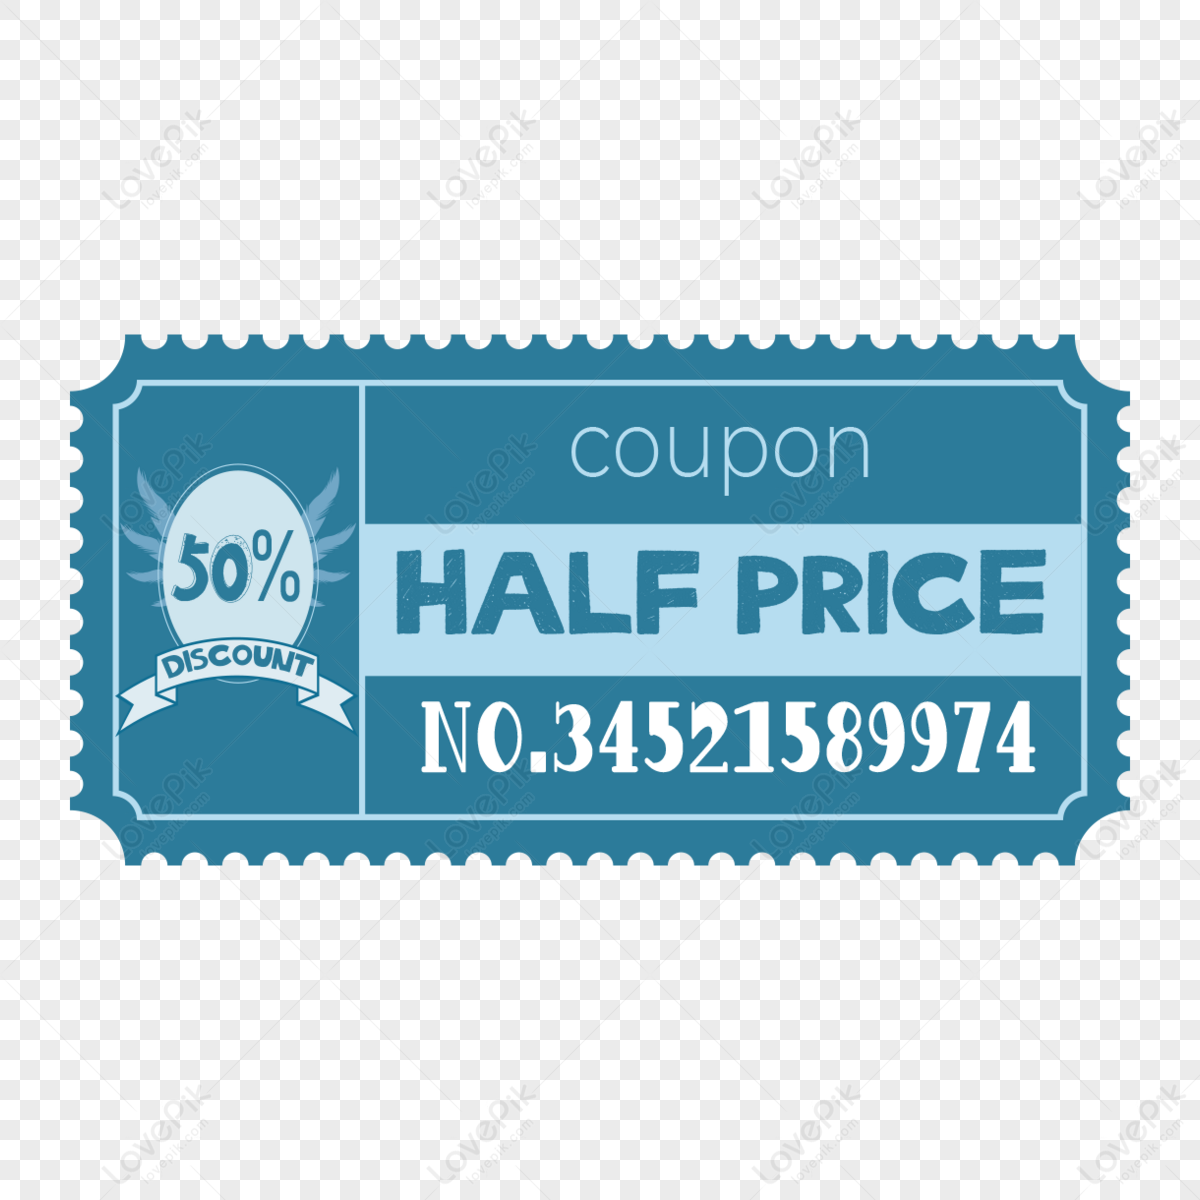 Coupon Code PNG Transparent Images Free Download, Vector Files